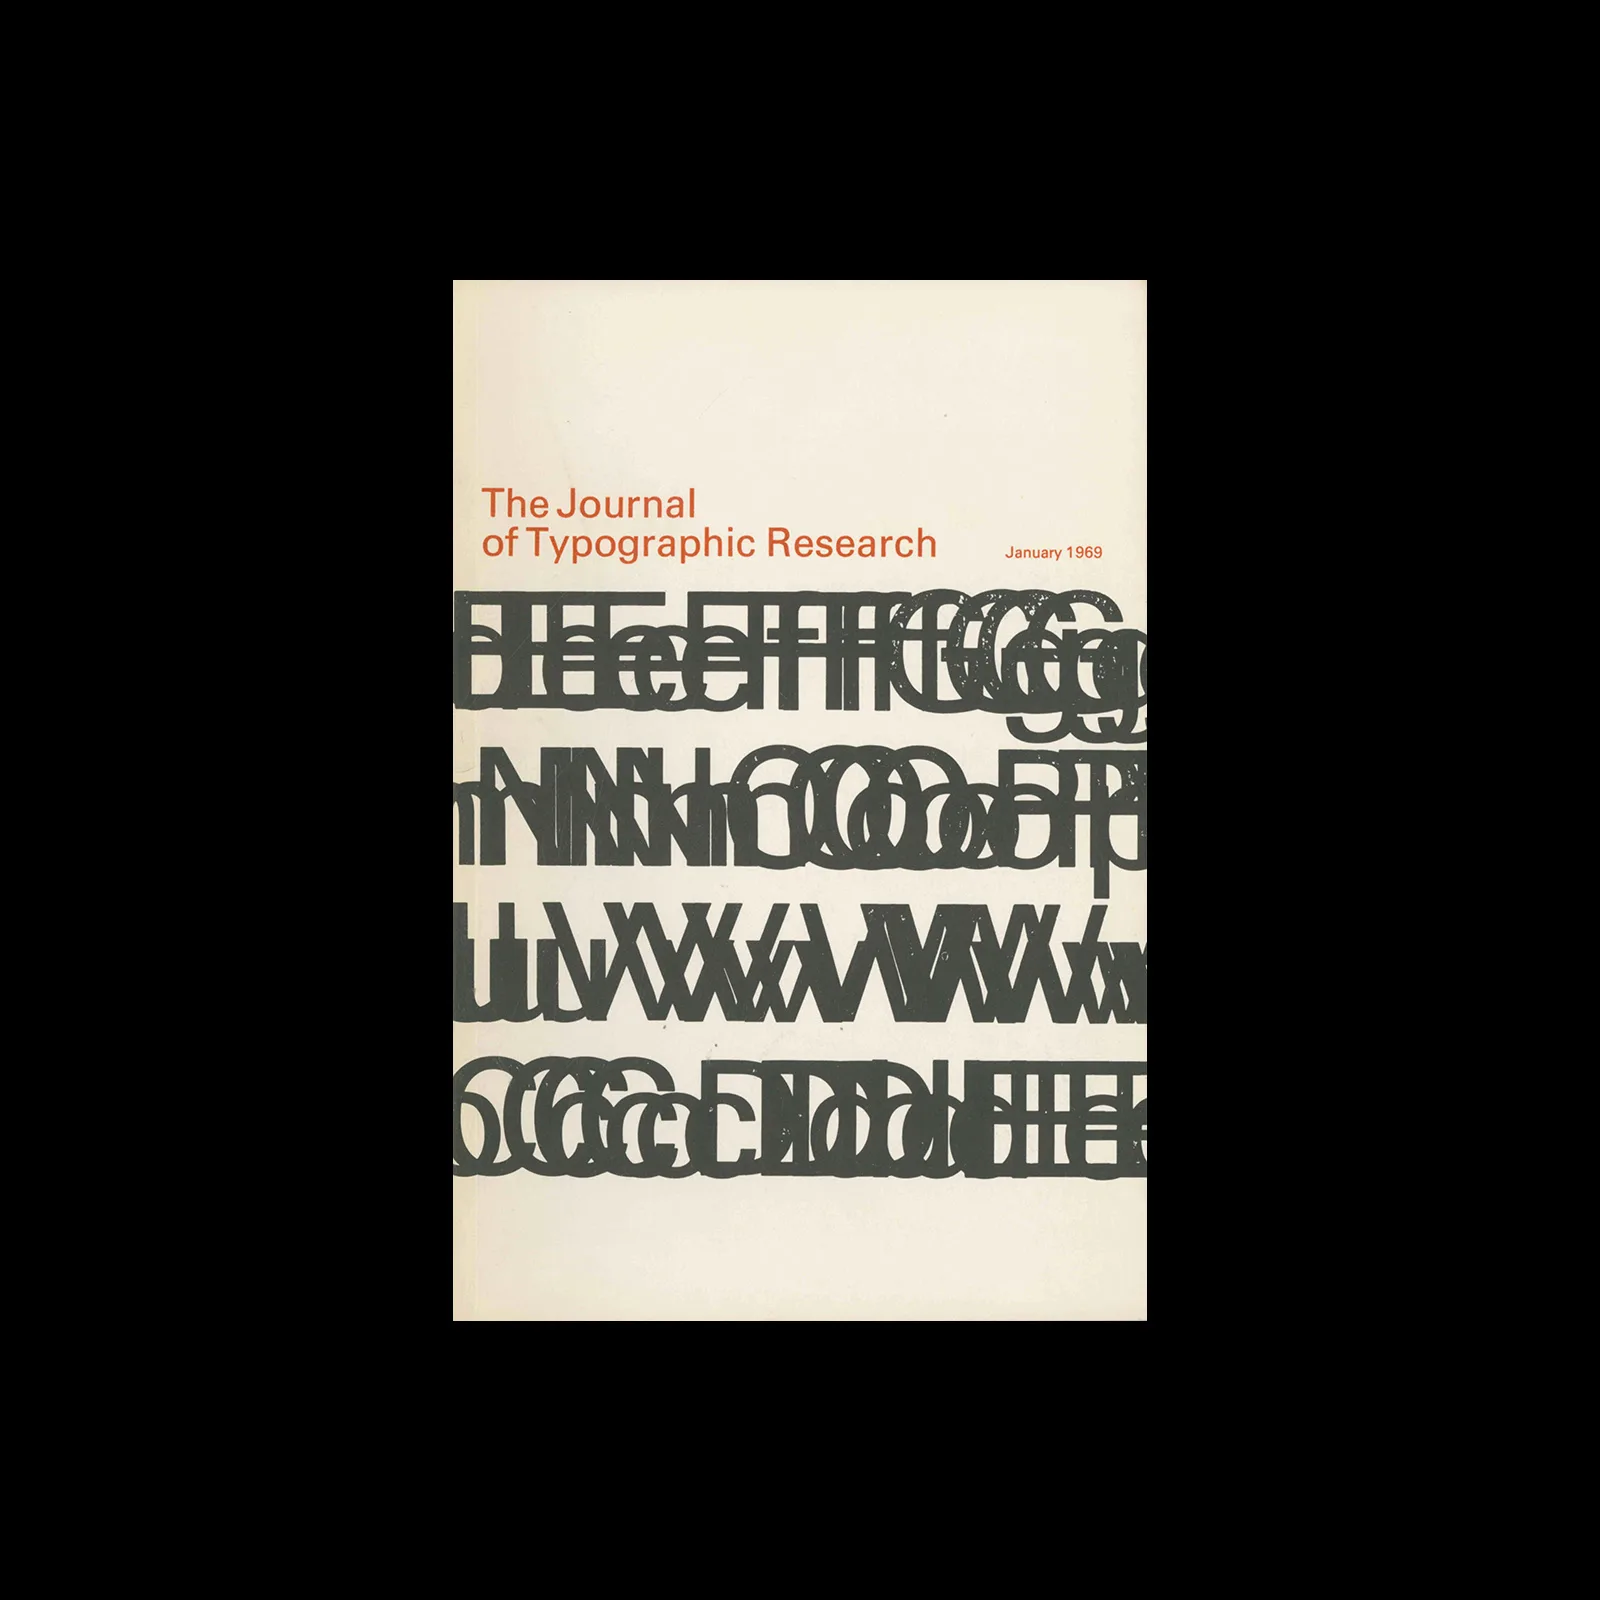 Visible Language (The Journal of Typographic Research, Vol 03, 01, January 1969